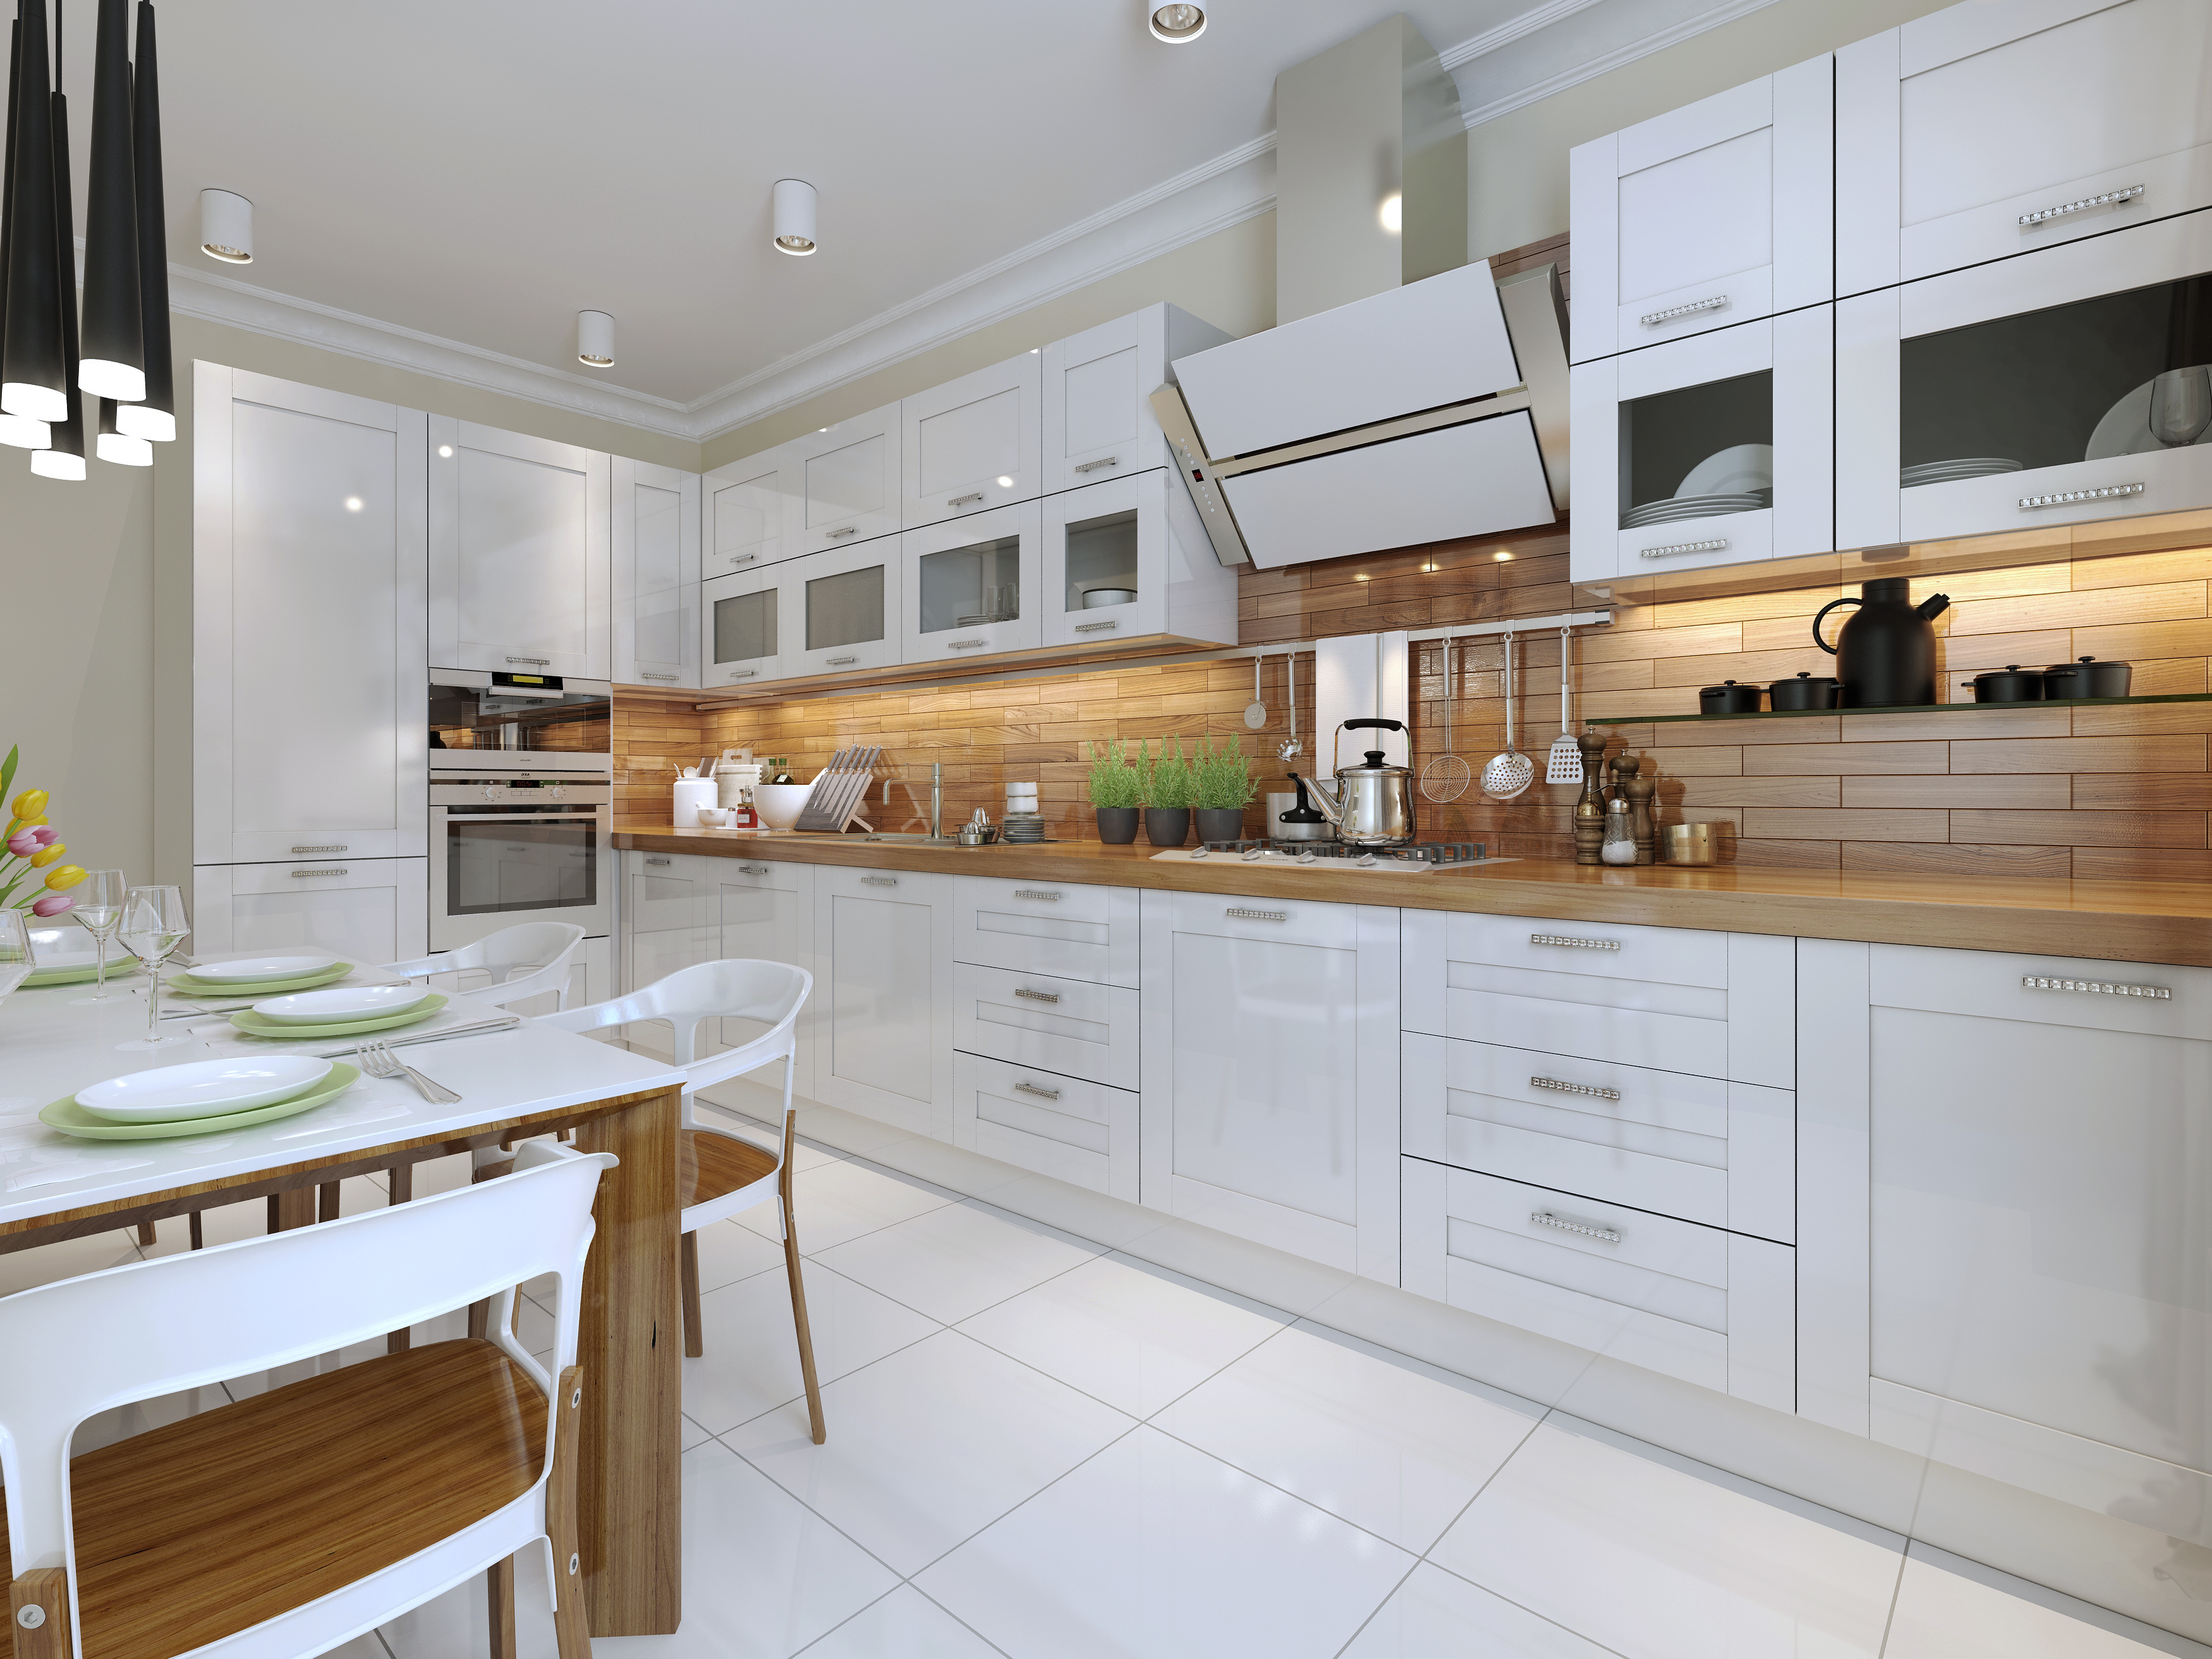 Handmade Kitchens, Country Style, Sussex, Violet Designs